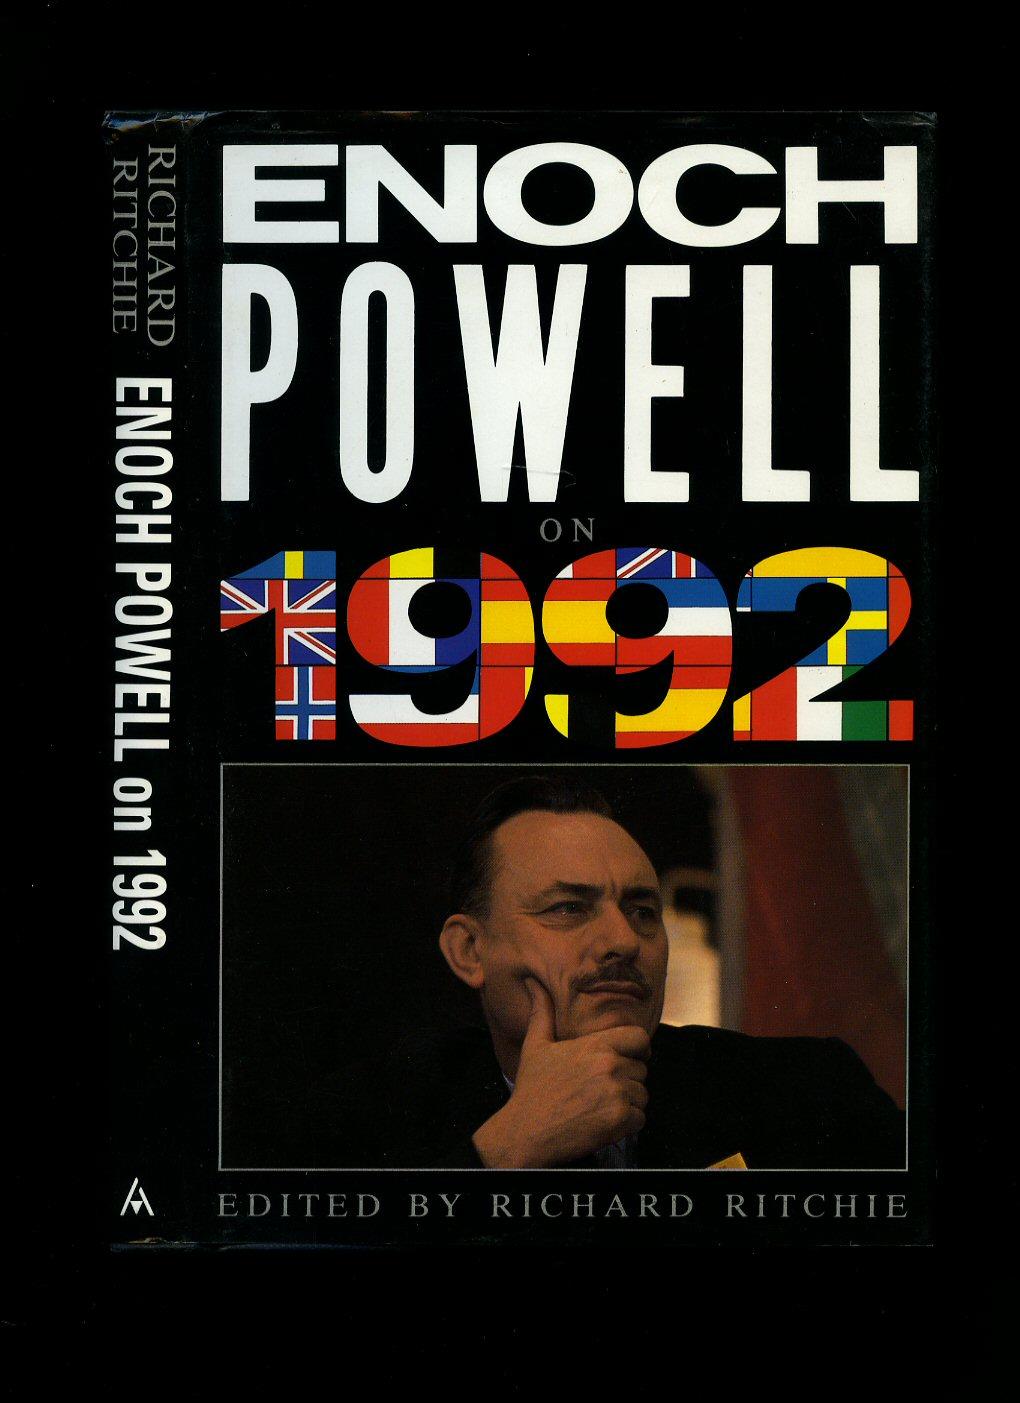 Enoch Powell on 1992 - Ritchie, Richard [Edited by] John Enoch Powell, MBE (16 June 1912 - 8 February 1998) was a British politician, classical scholar, linguist, and poet. He served as a Conservative Member of Parliament (MP, 1950–74), Ulster Unionist Party (UUP) MP (1974–87), and Minister of Health (1960–63).